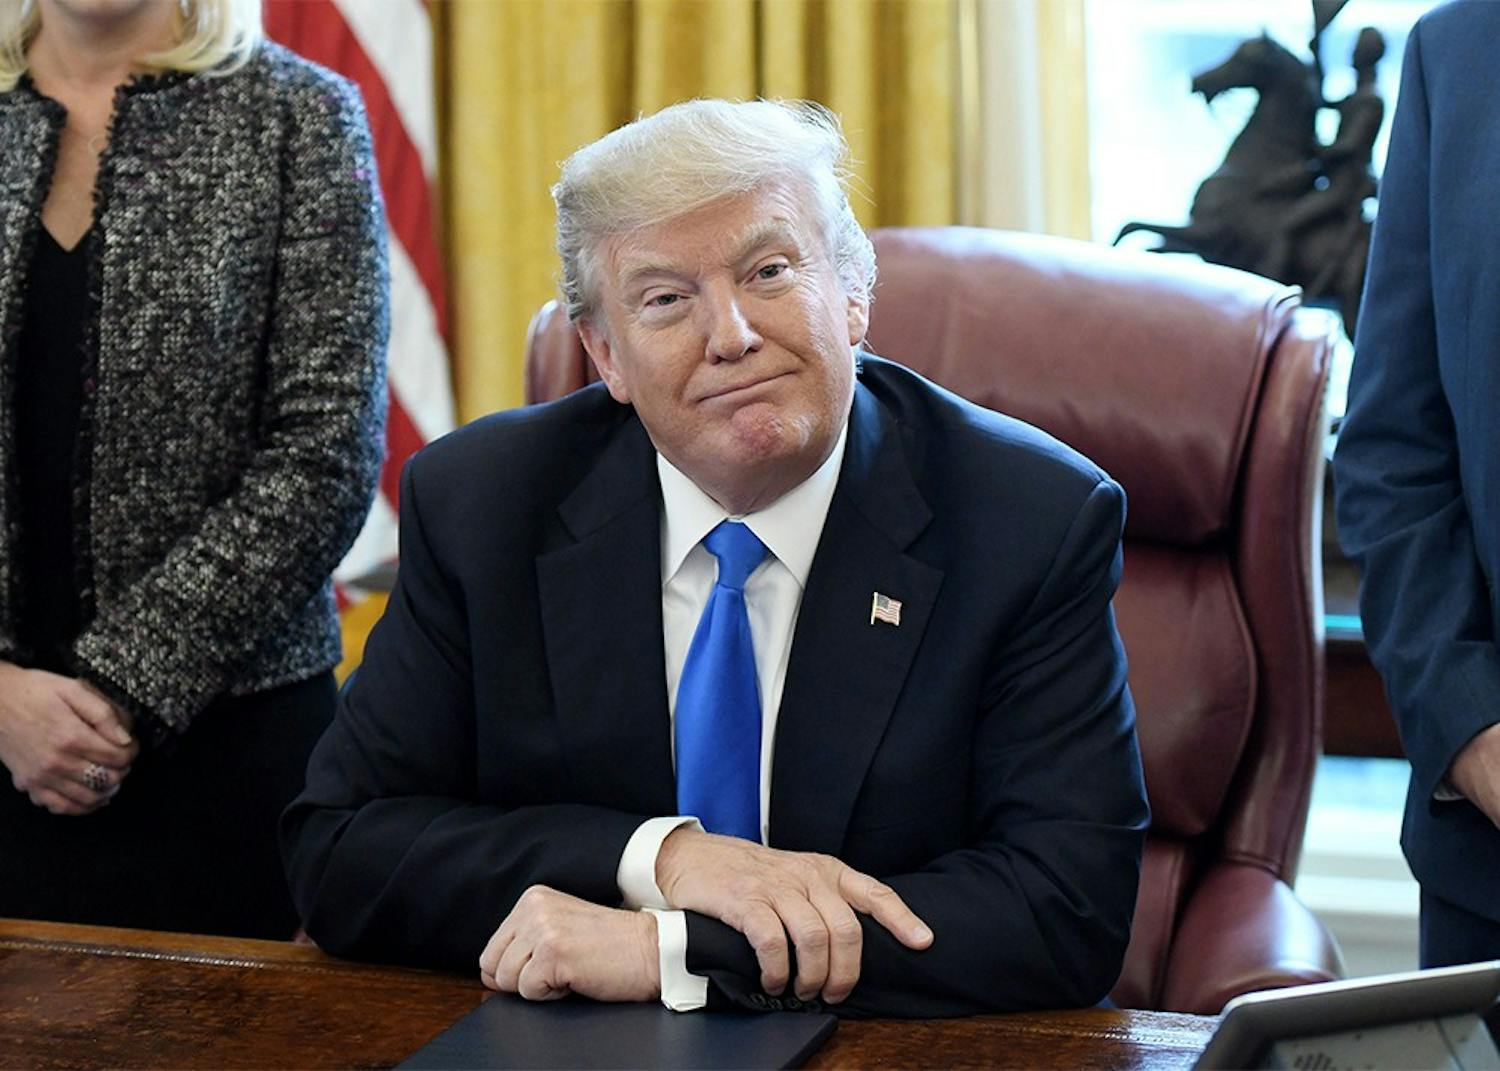 President Trump looks on after signing an executive order on "Supporting our Veterans during their Transition from Uniformed Service to Civilian Life" on Jan. 9. Trump and Vice President Mike Pence will appear at a rally Thursday night in Elkhart, Indiana.&nbsp;